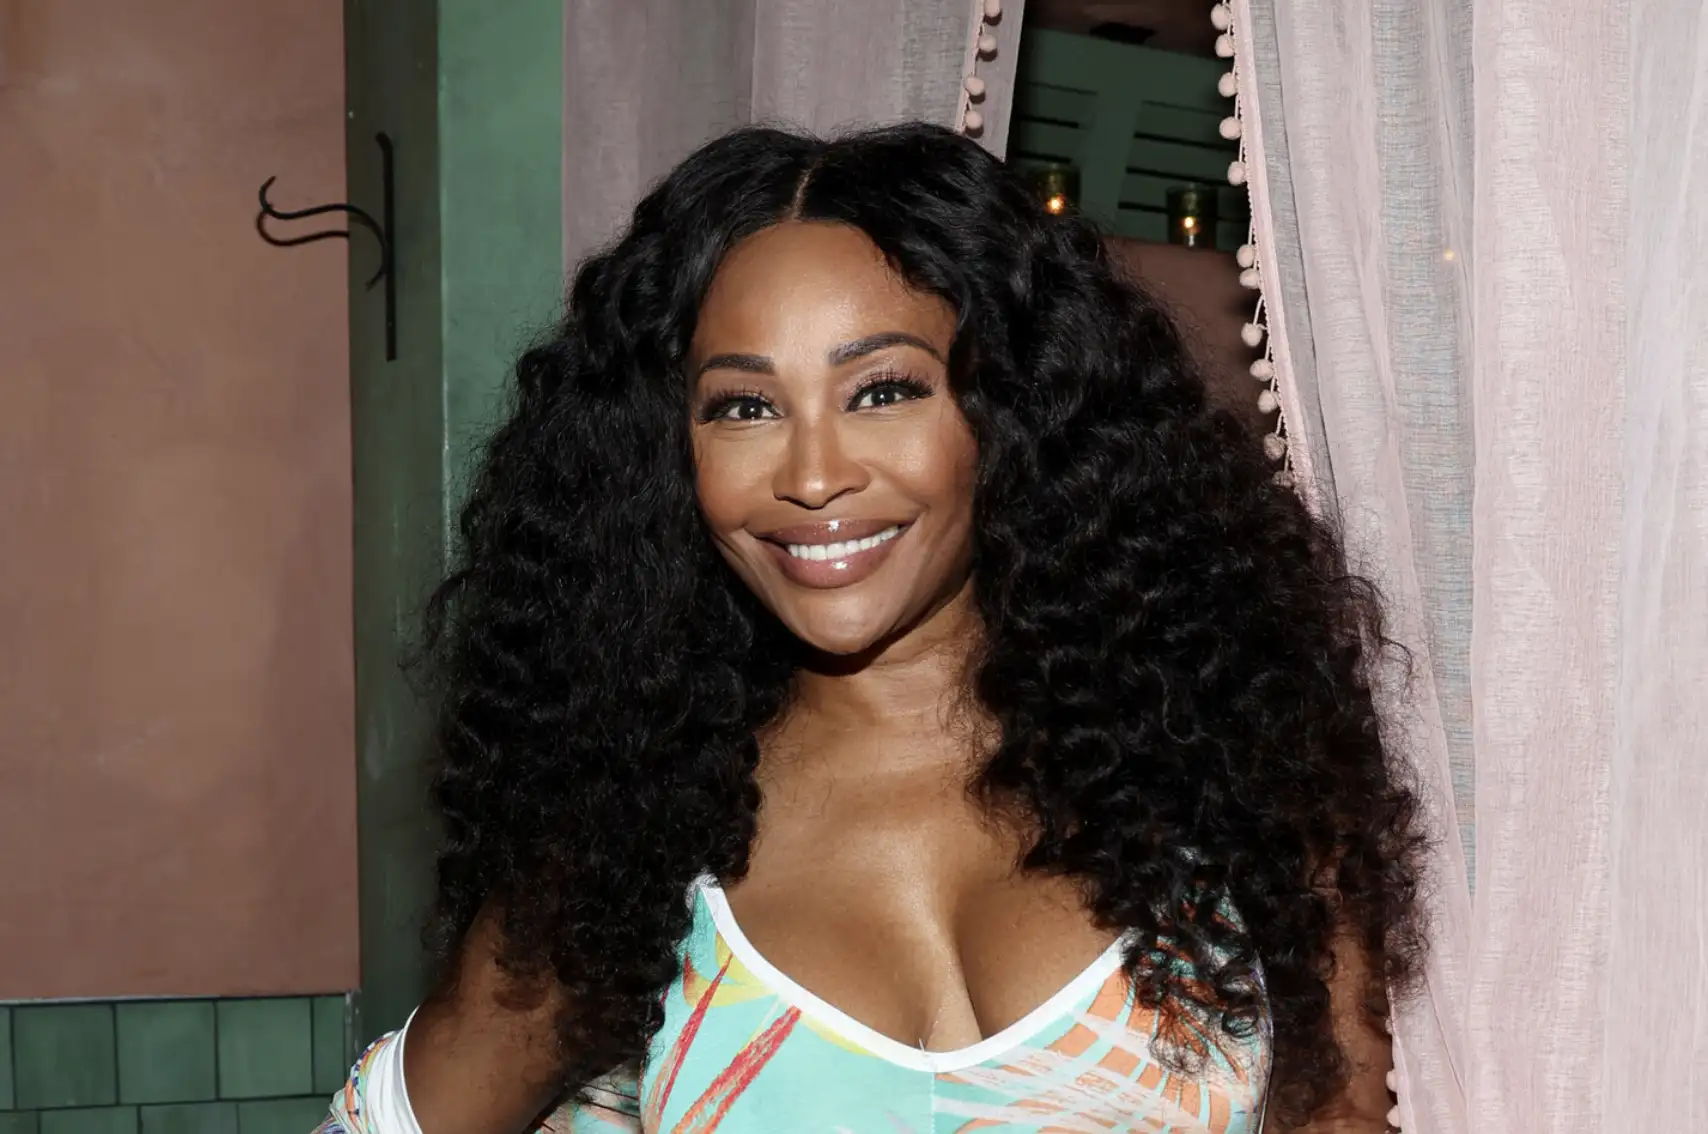 Cynthia Bailey's Brand Launch Event Was a Housewives Crossover | The Daily Dish